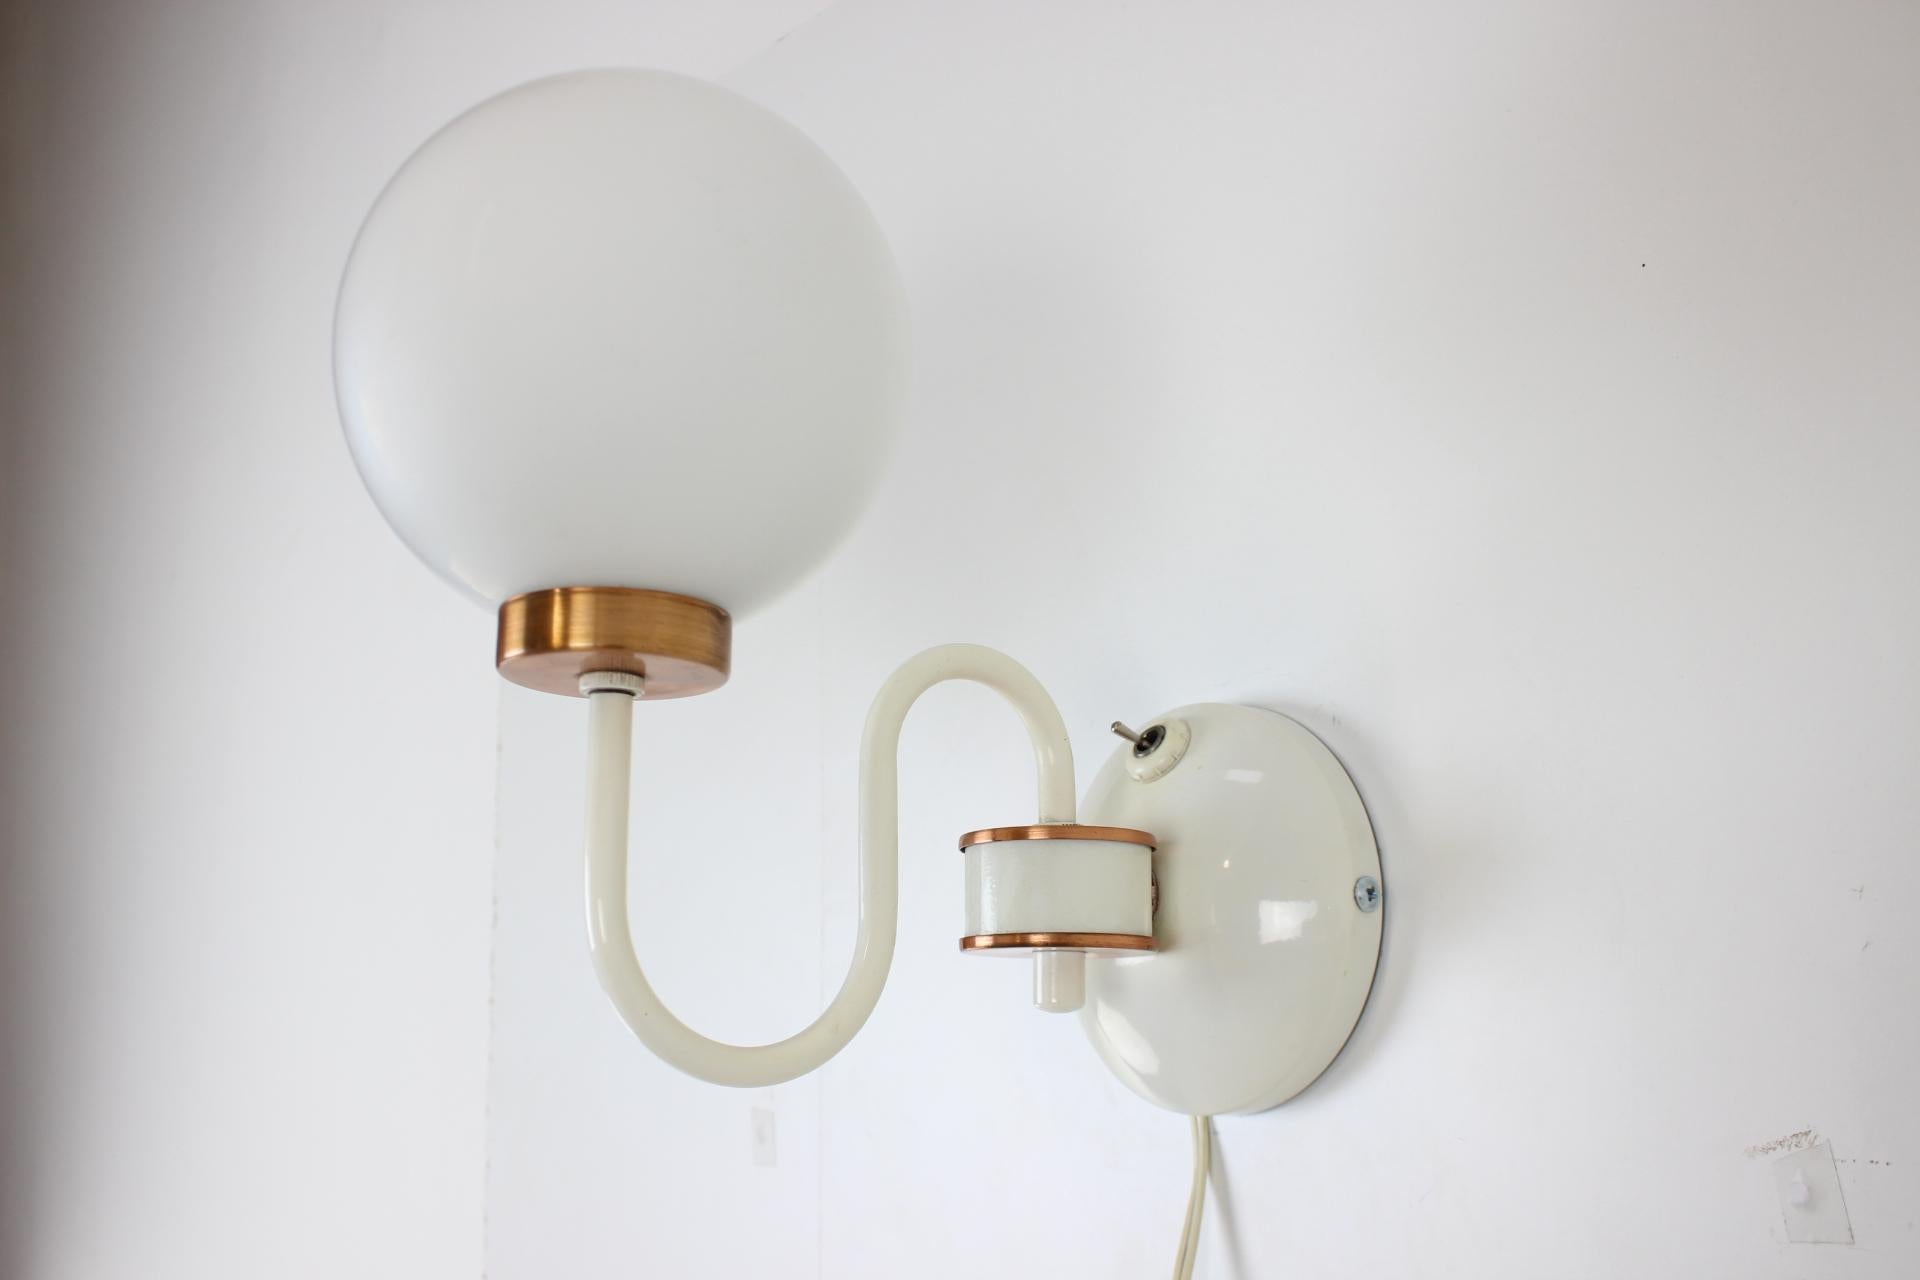 Czech Mid-Century Wall Lamp by Drukov, 1970’s For Sale